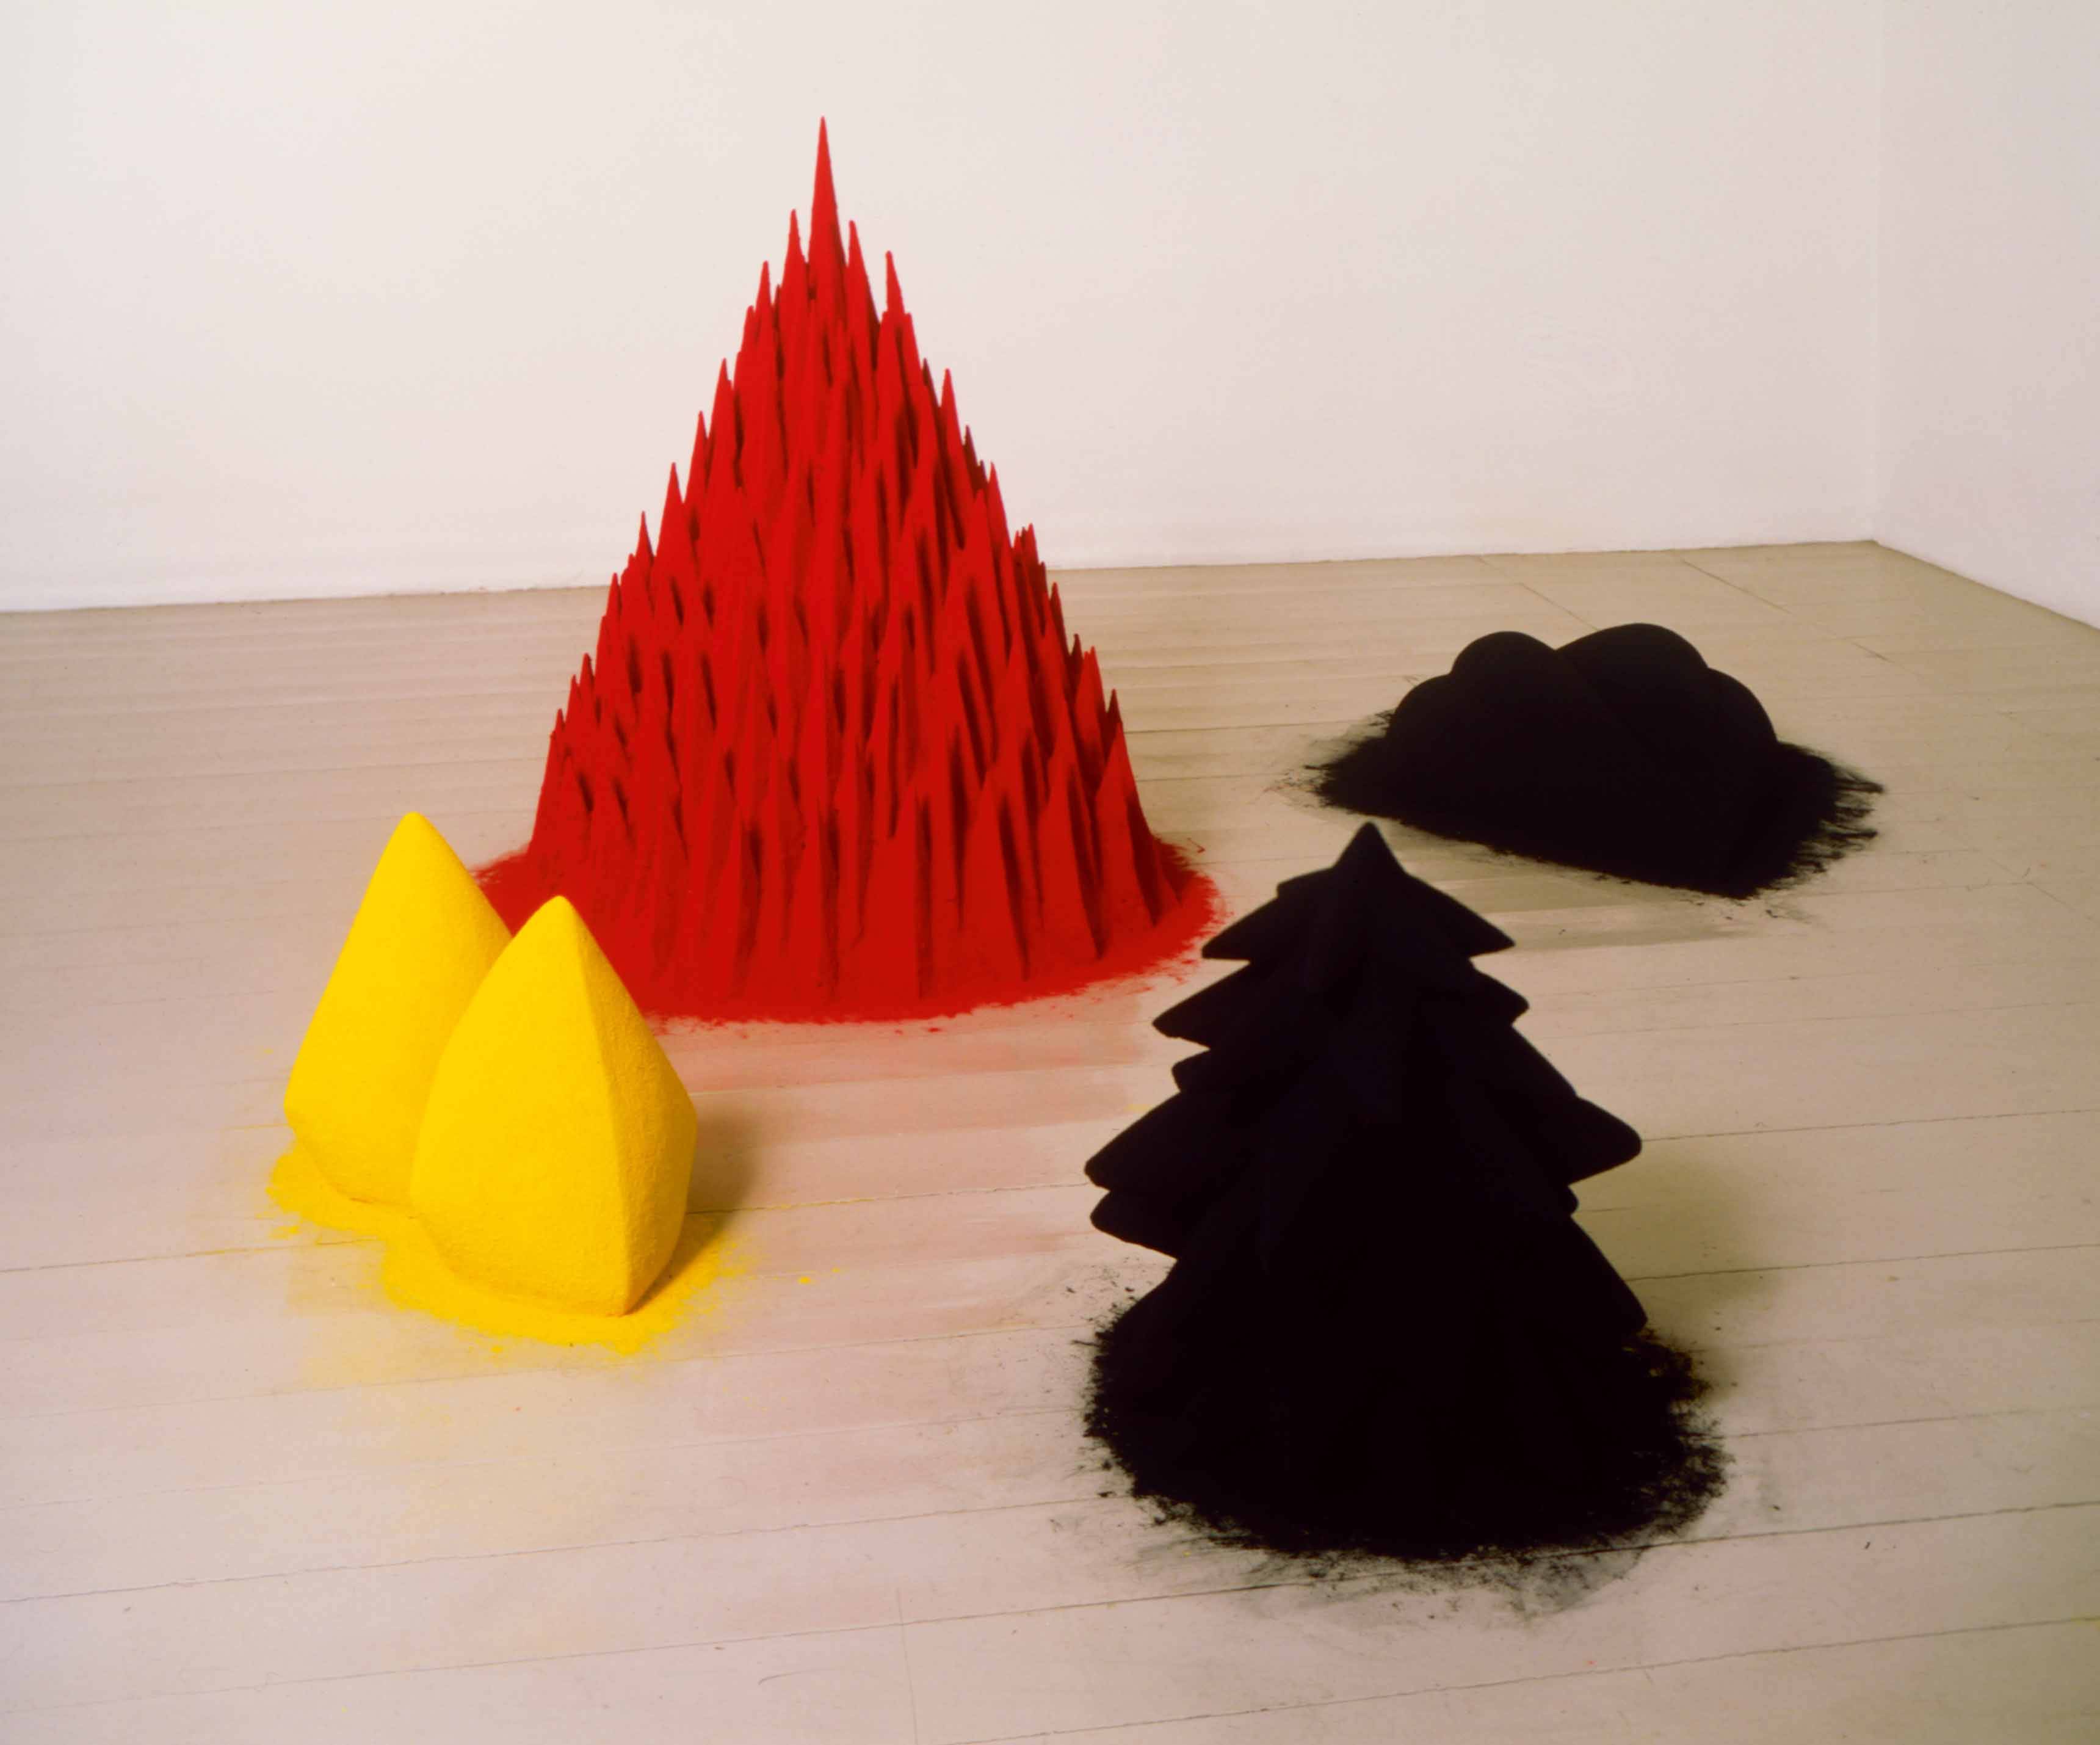 “White Sand, Red Millet, Many Flowers” (1982) by Anish Kapoor, 101 x 241,5 x 217,4 cm